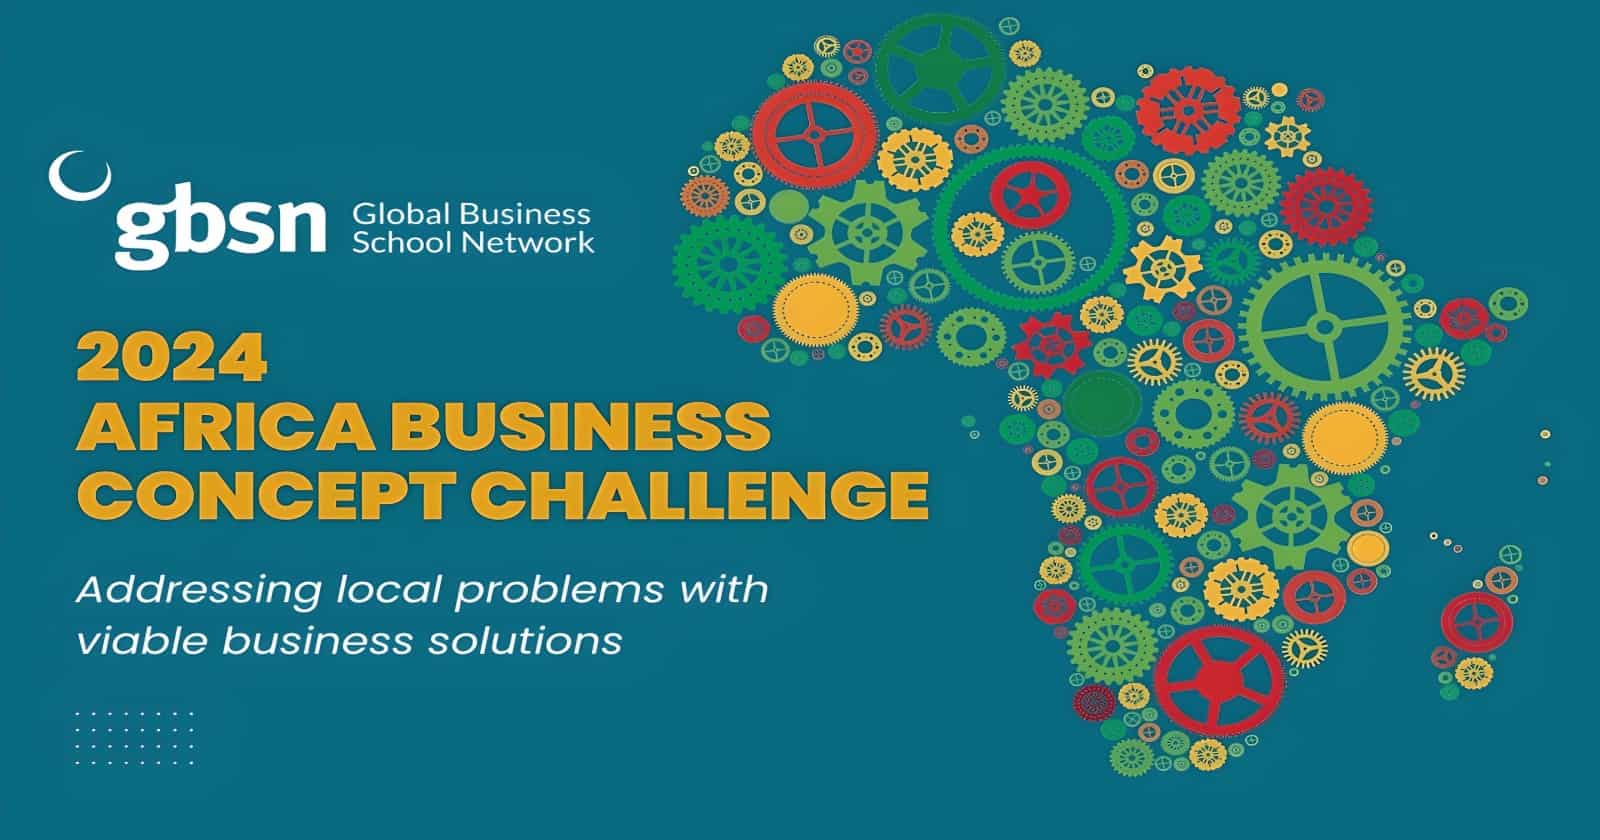 The 4th Annual Africa Business Concept Challenge